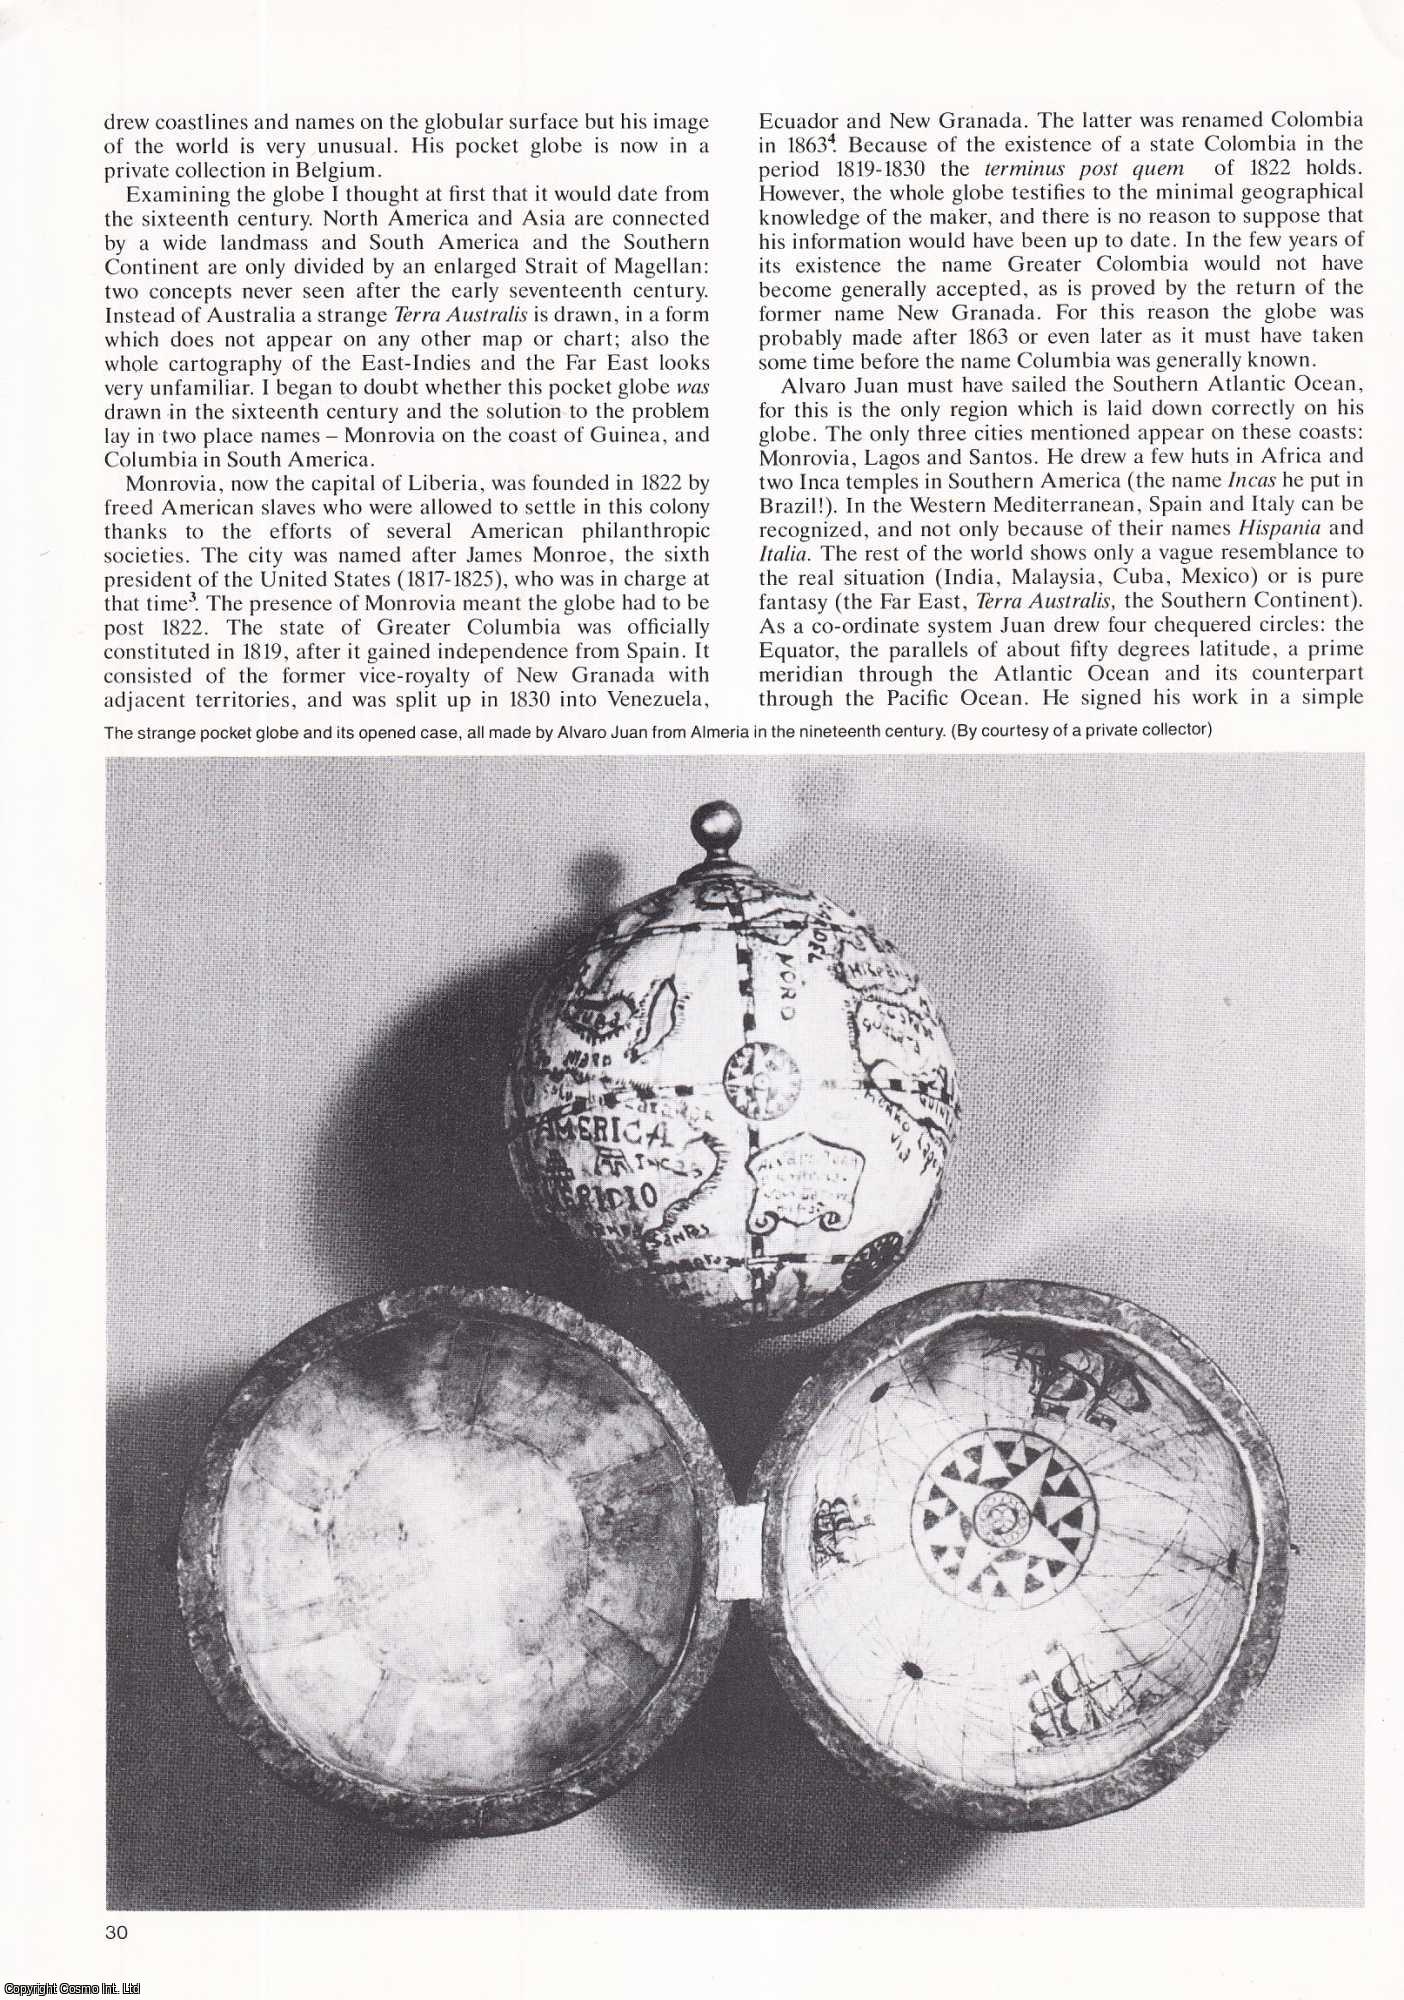 Peter van der Krogt - Two Peculiar 19th Century Globes; an Umbrella Globe and a Pocket Globe made by a Spanish Sailor. An original article from Map Collector Magazine, 1985.